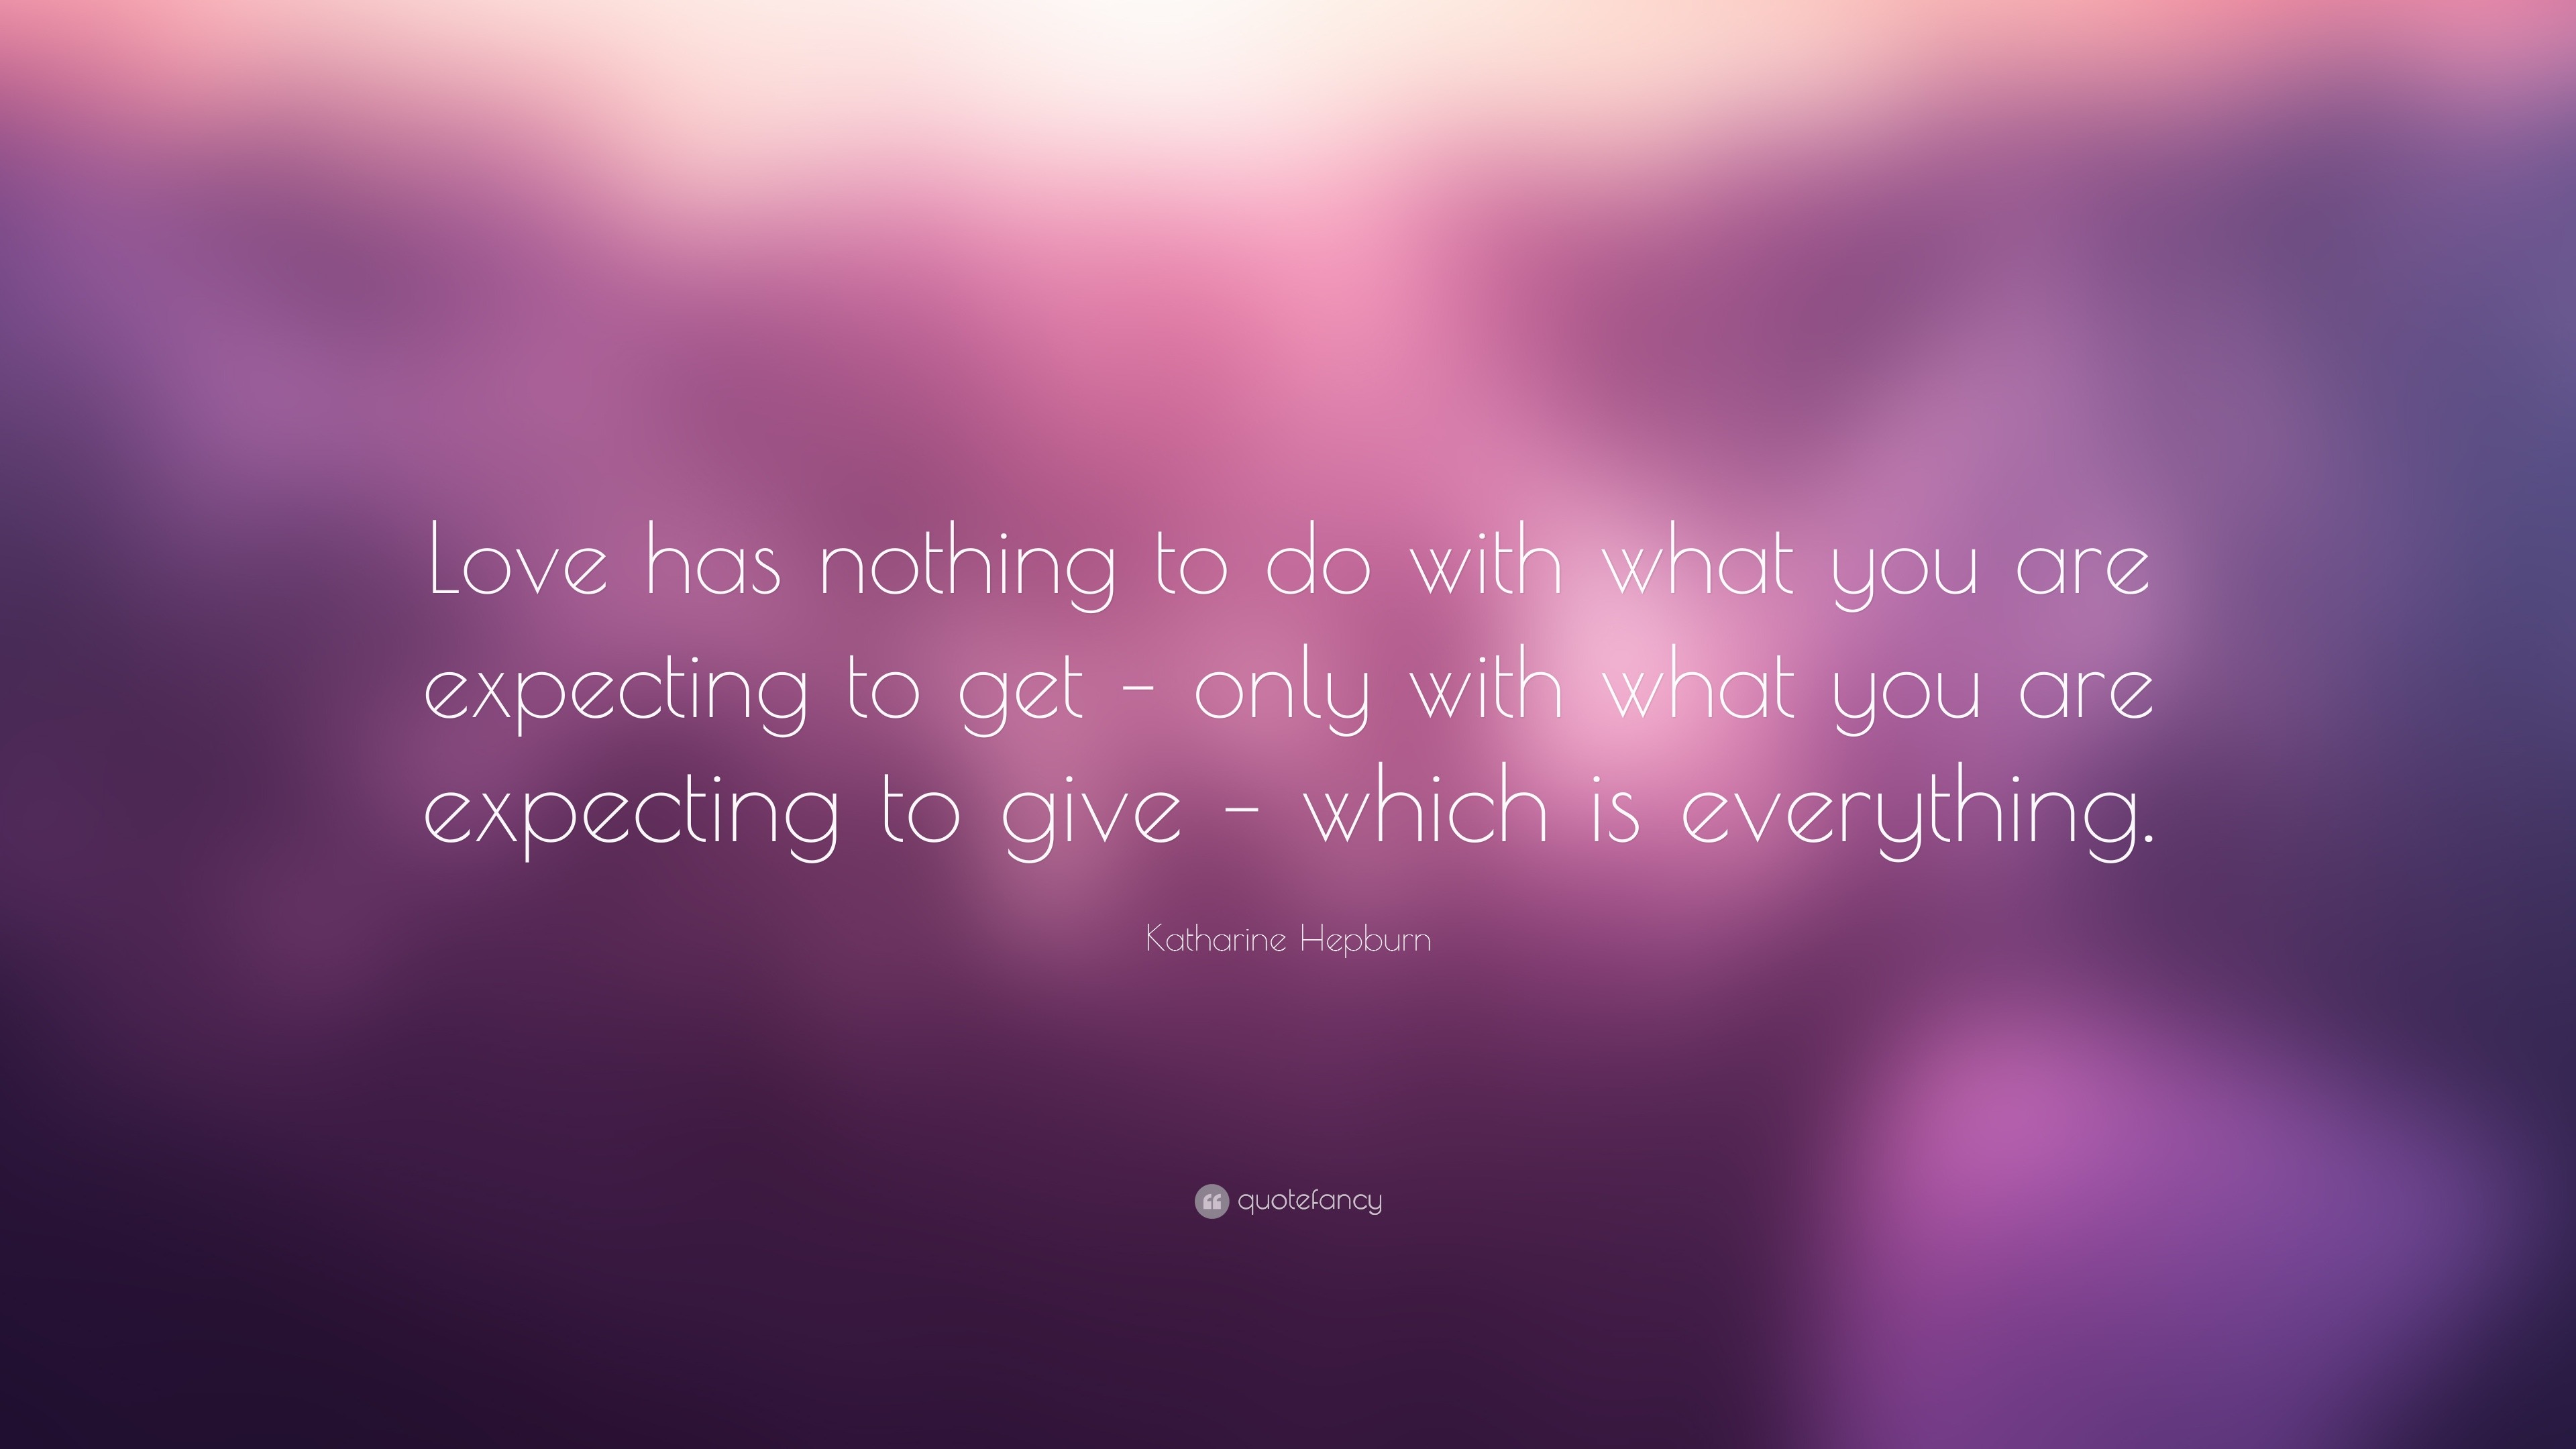 Katharine Hepburn Quote: “Love has nothing to do with what you are ...